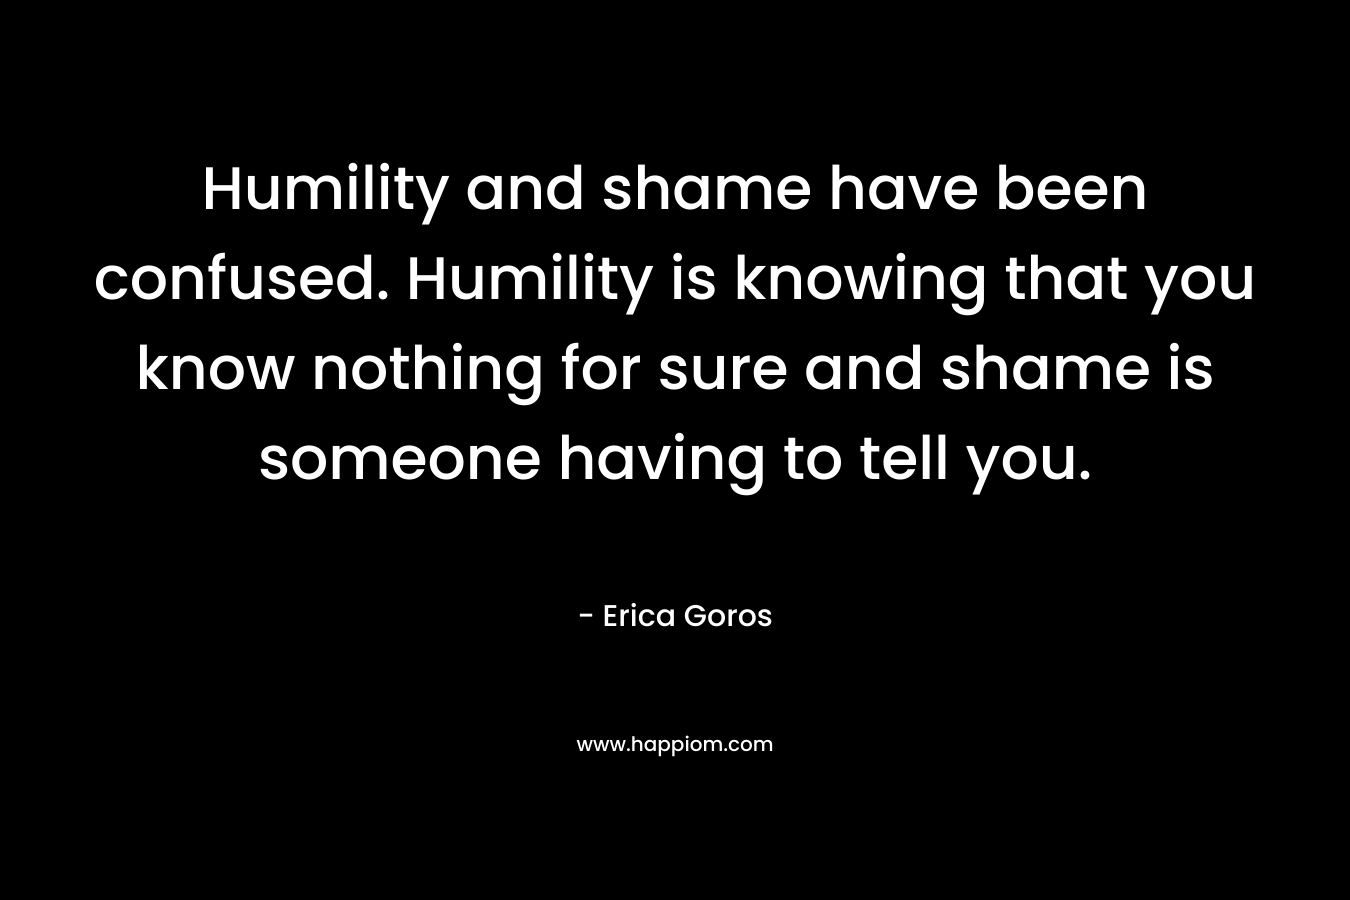 Humility and shame have been confused. Humility is knowing that you know nothing for sure and shame is someone having to tell you.